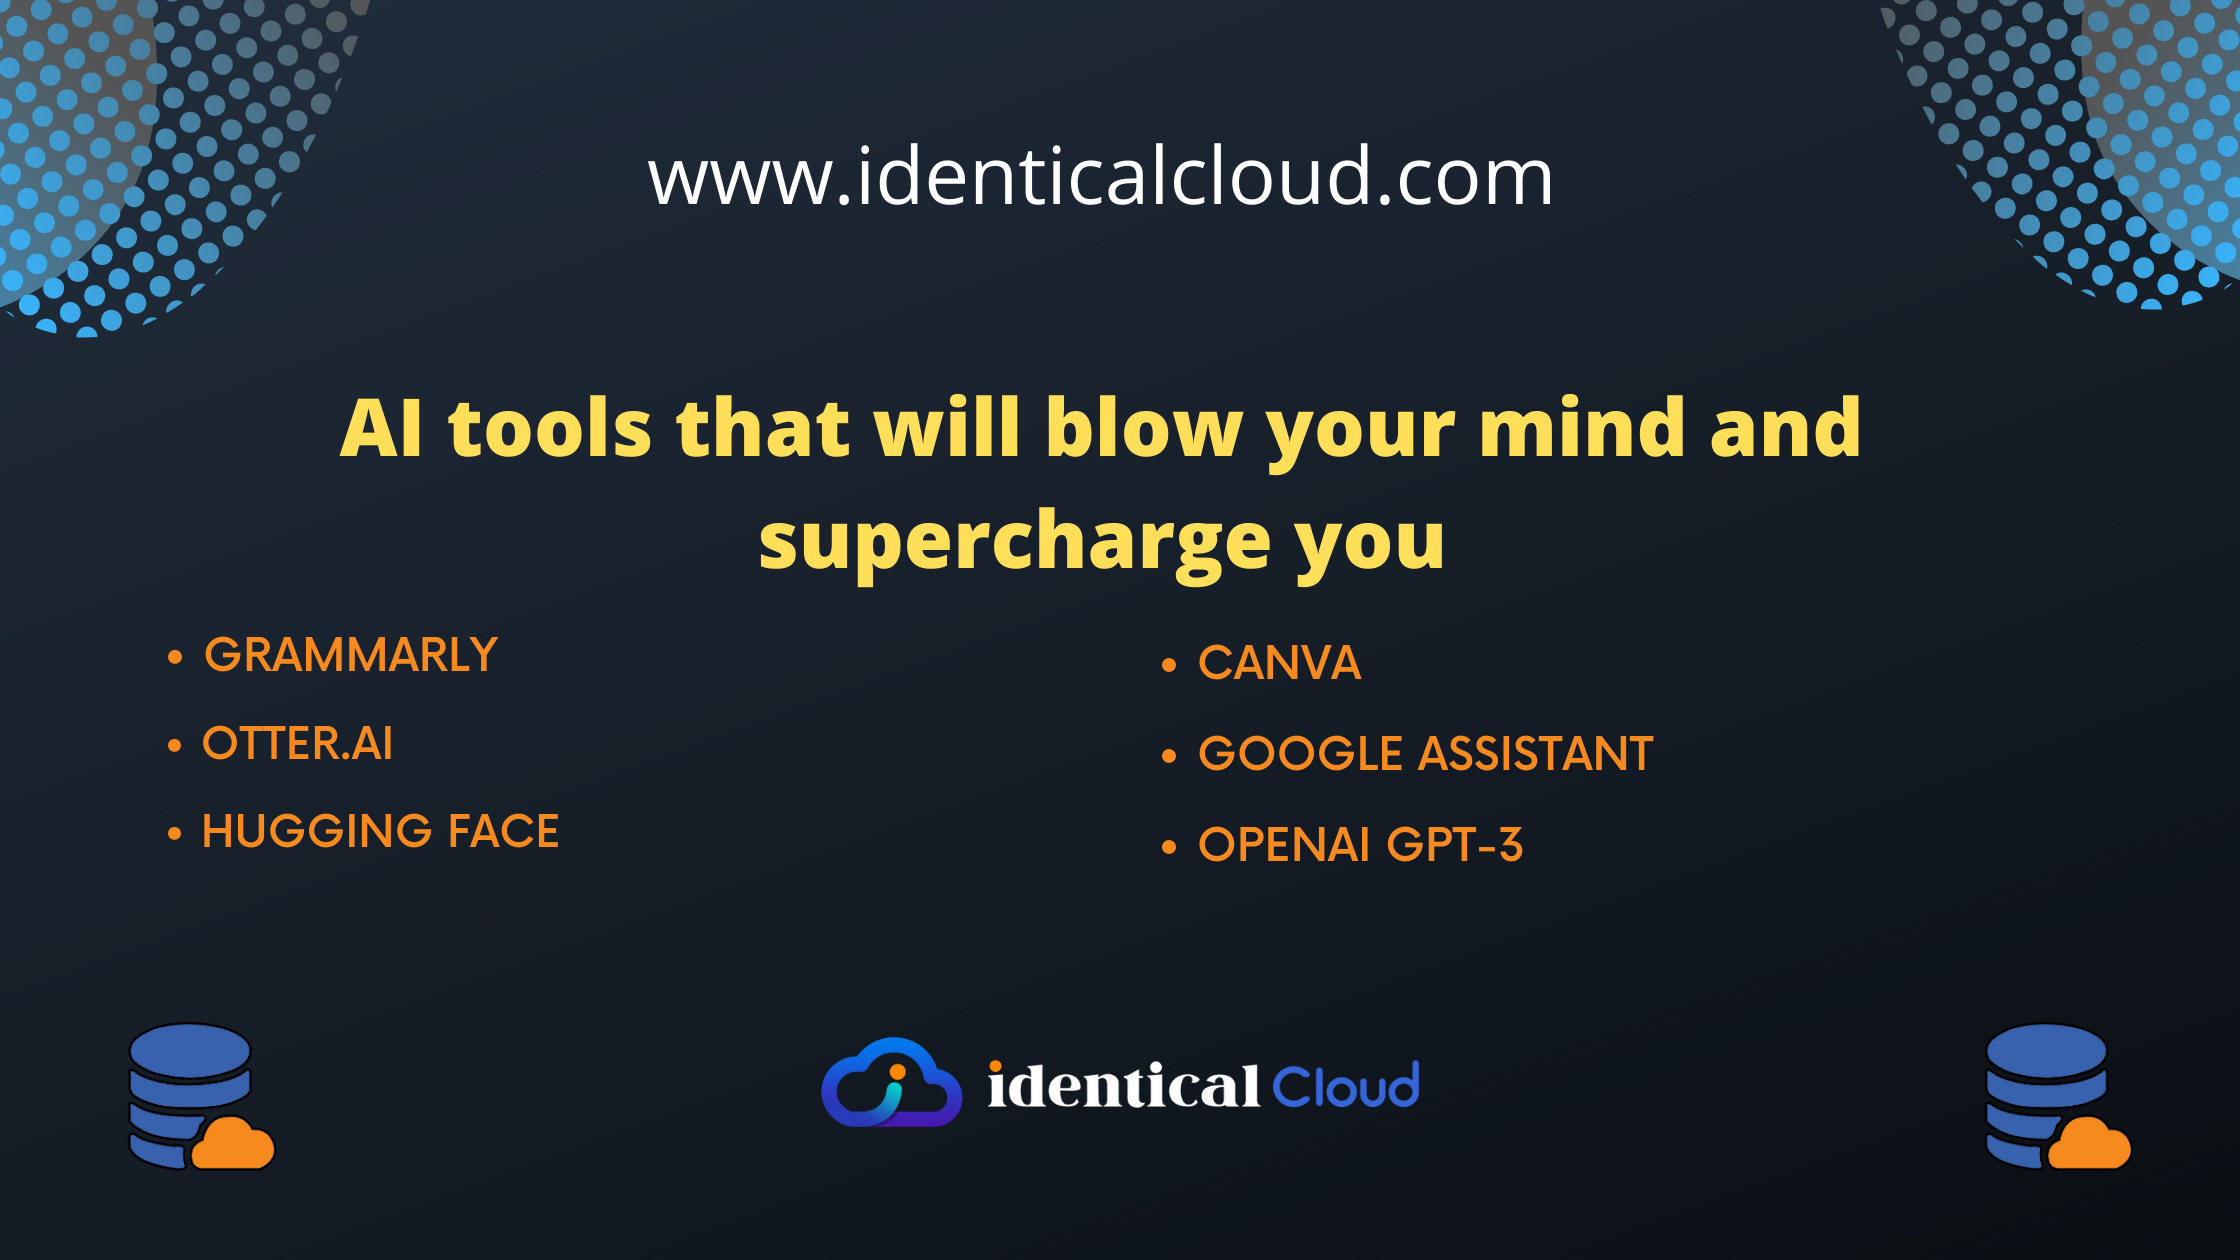 AI tools that will blow your mind and supercharge you - identicalcloud.com